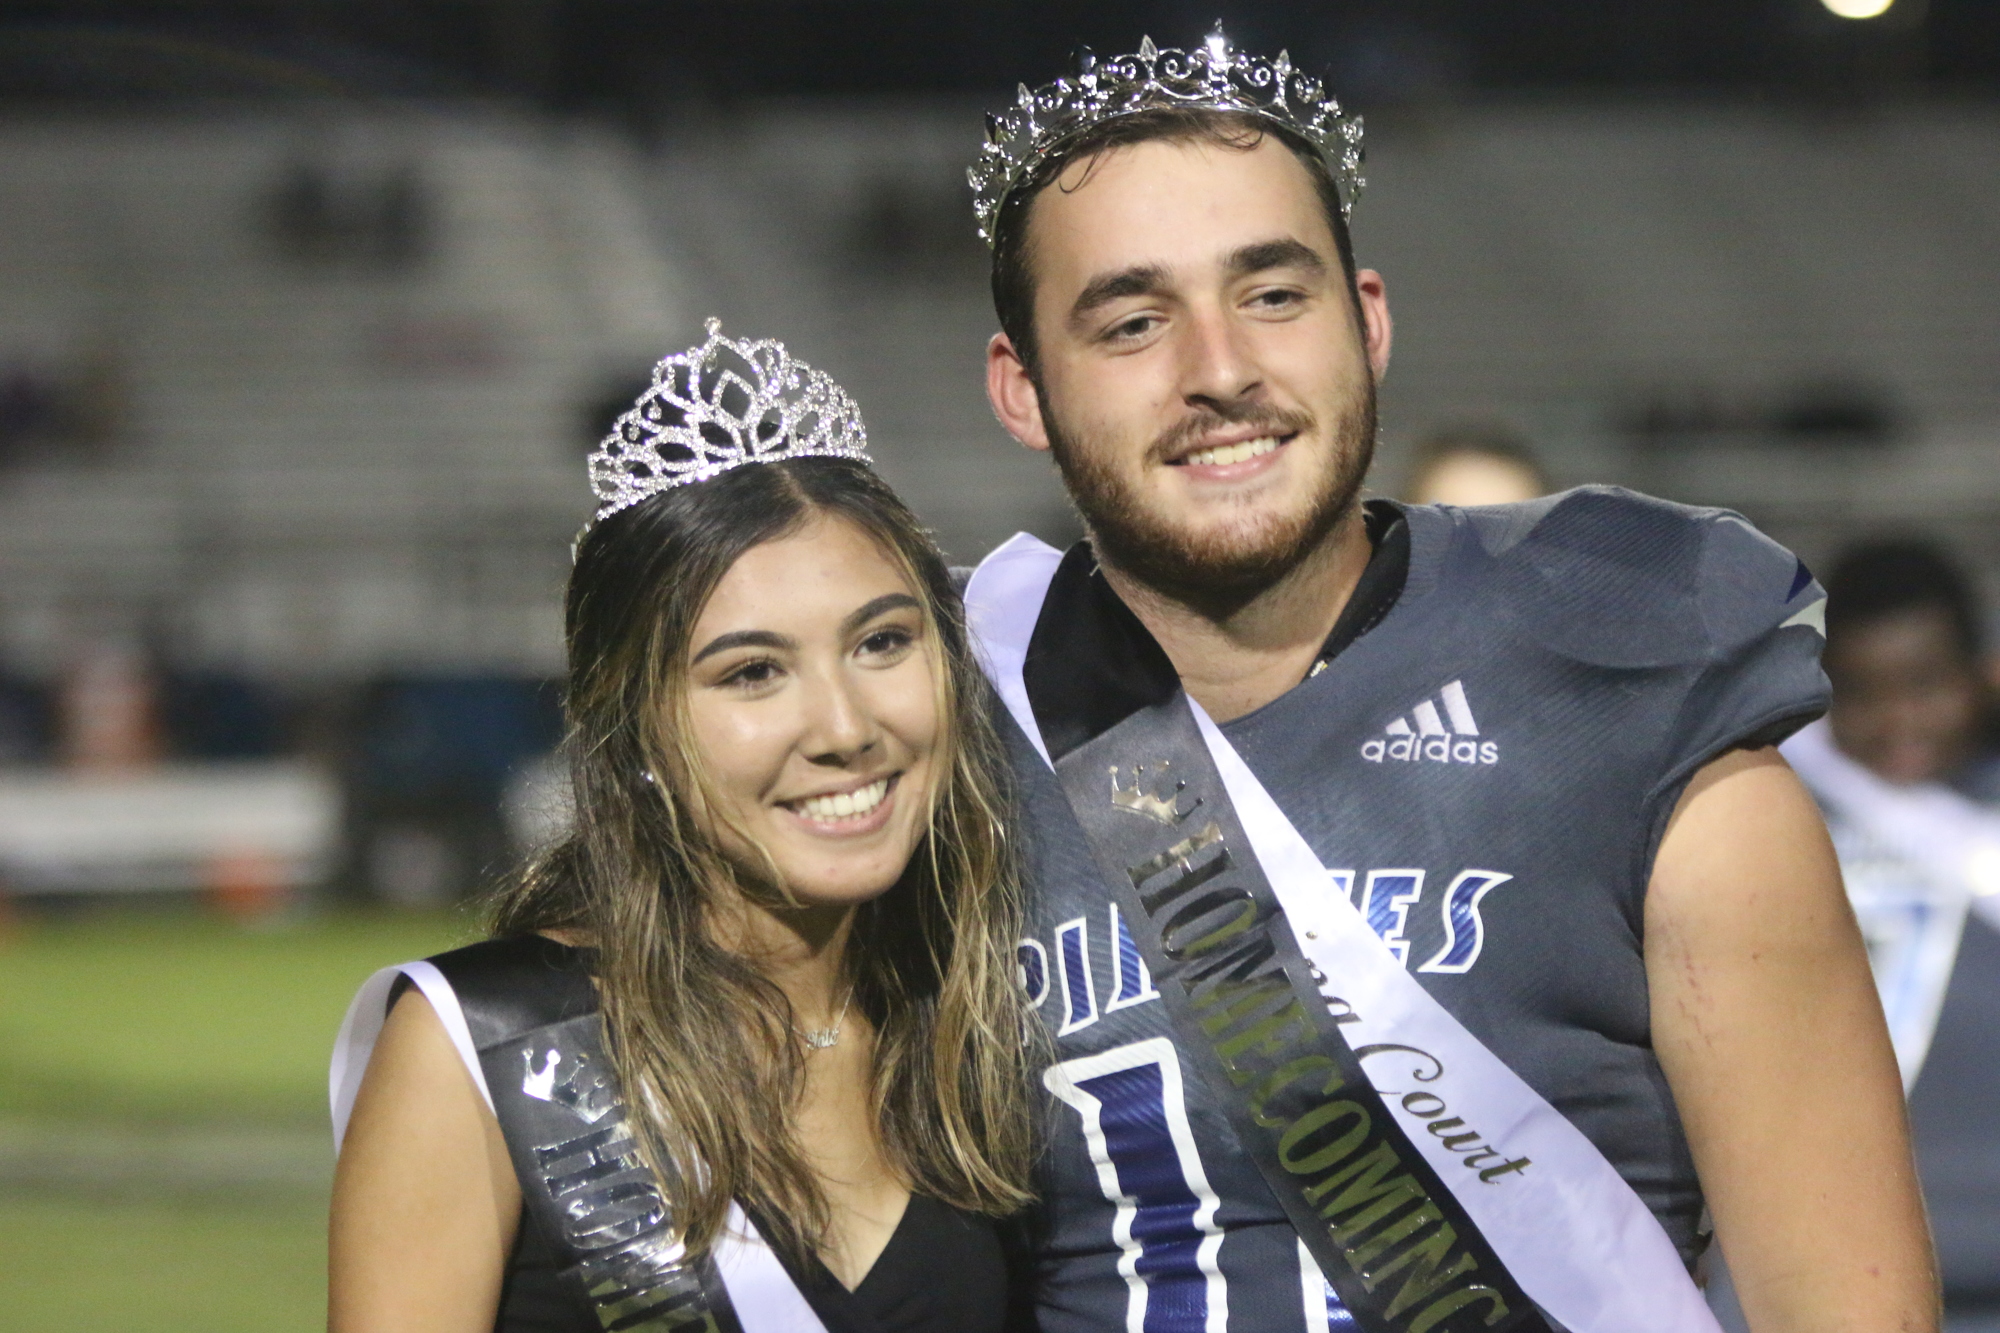 Tate Winecoff and his girlfriend Alyssa Sa were the Pirates' homecoming king and queen. They were also homecoming princess and prince as freshmen. File photo